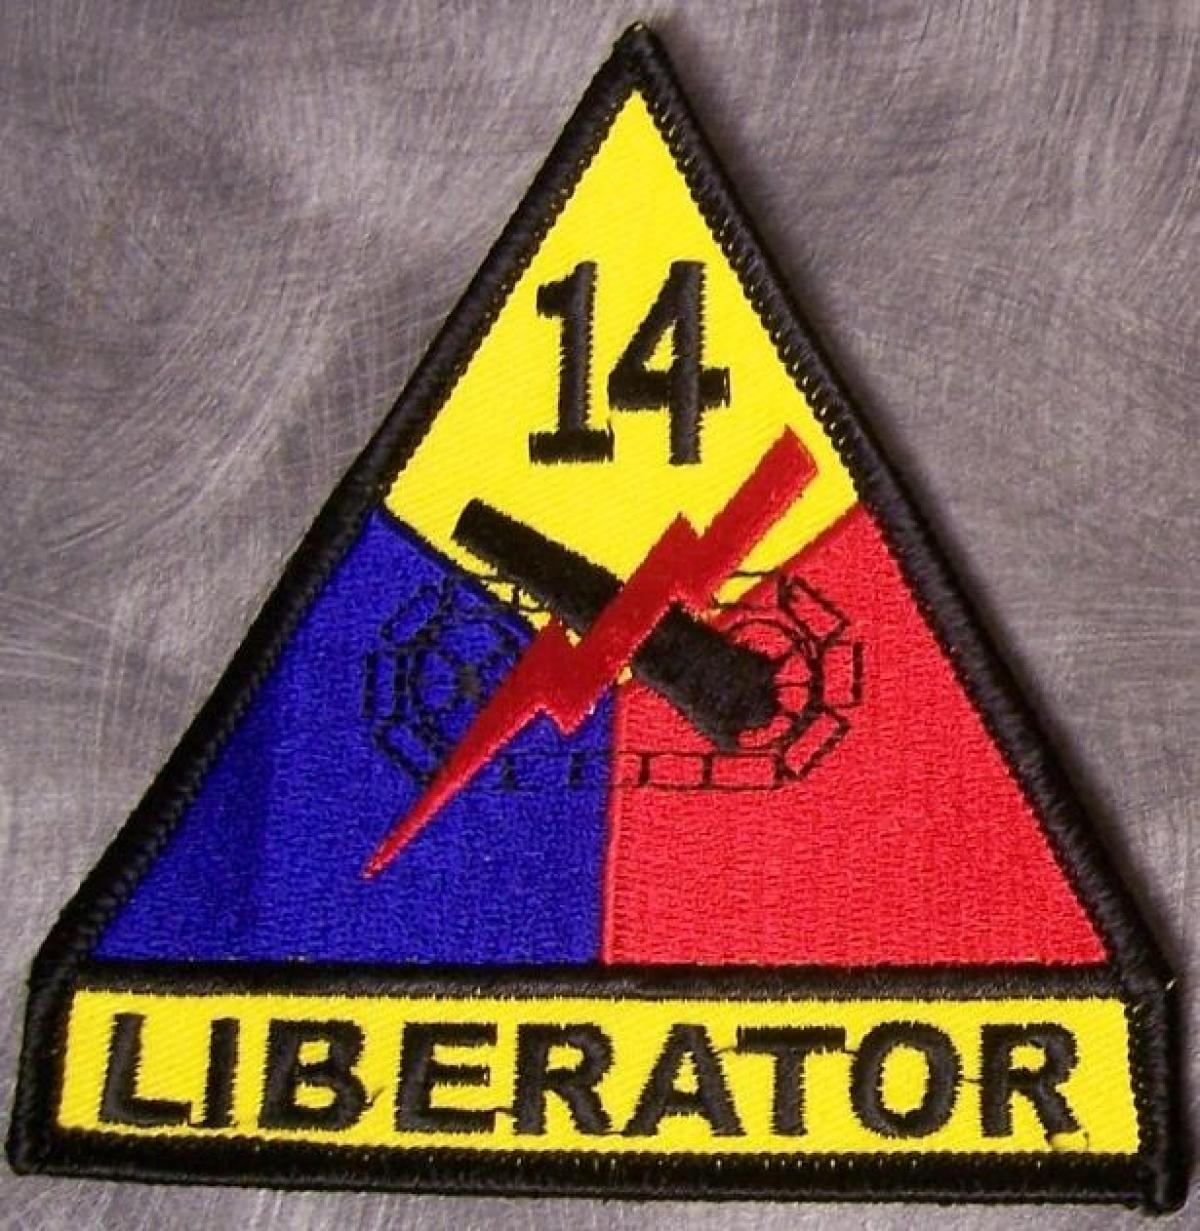 OK, Grove, Headstone Symbols and Meanings, U. S. Army 14th Armored Division (Liberators)